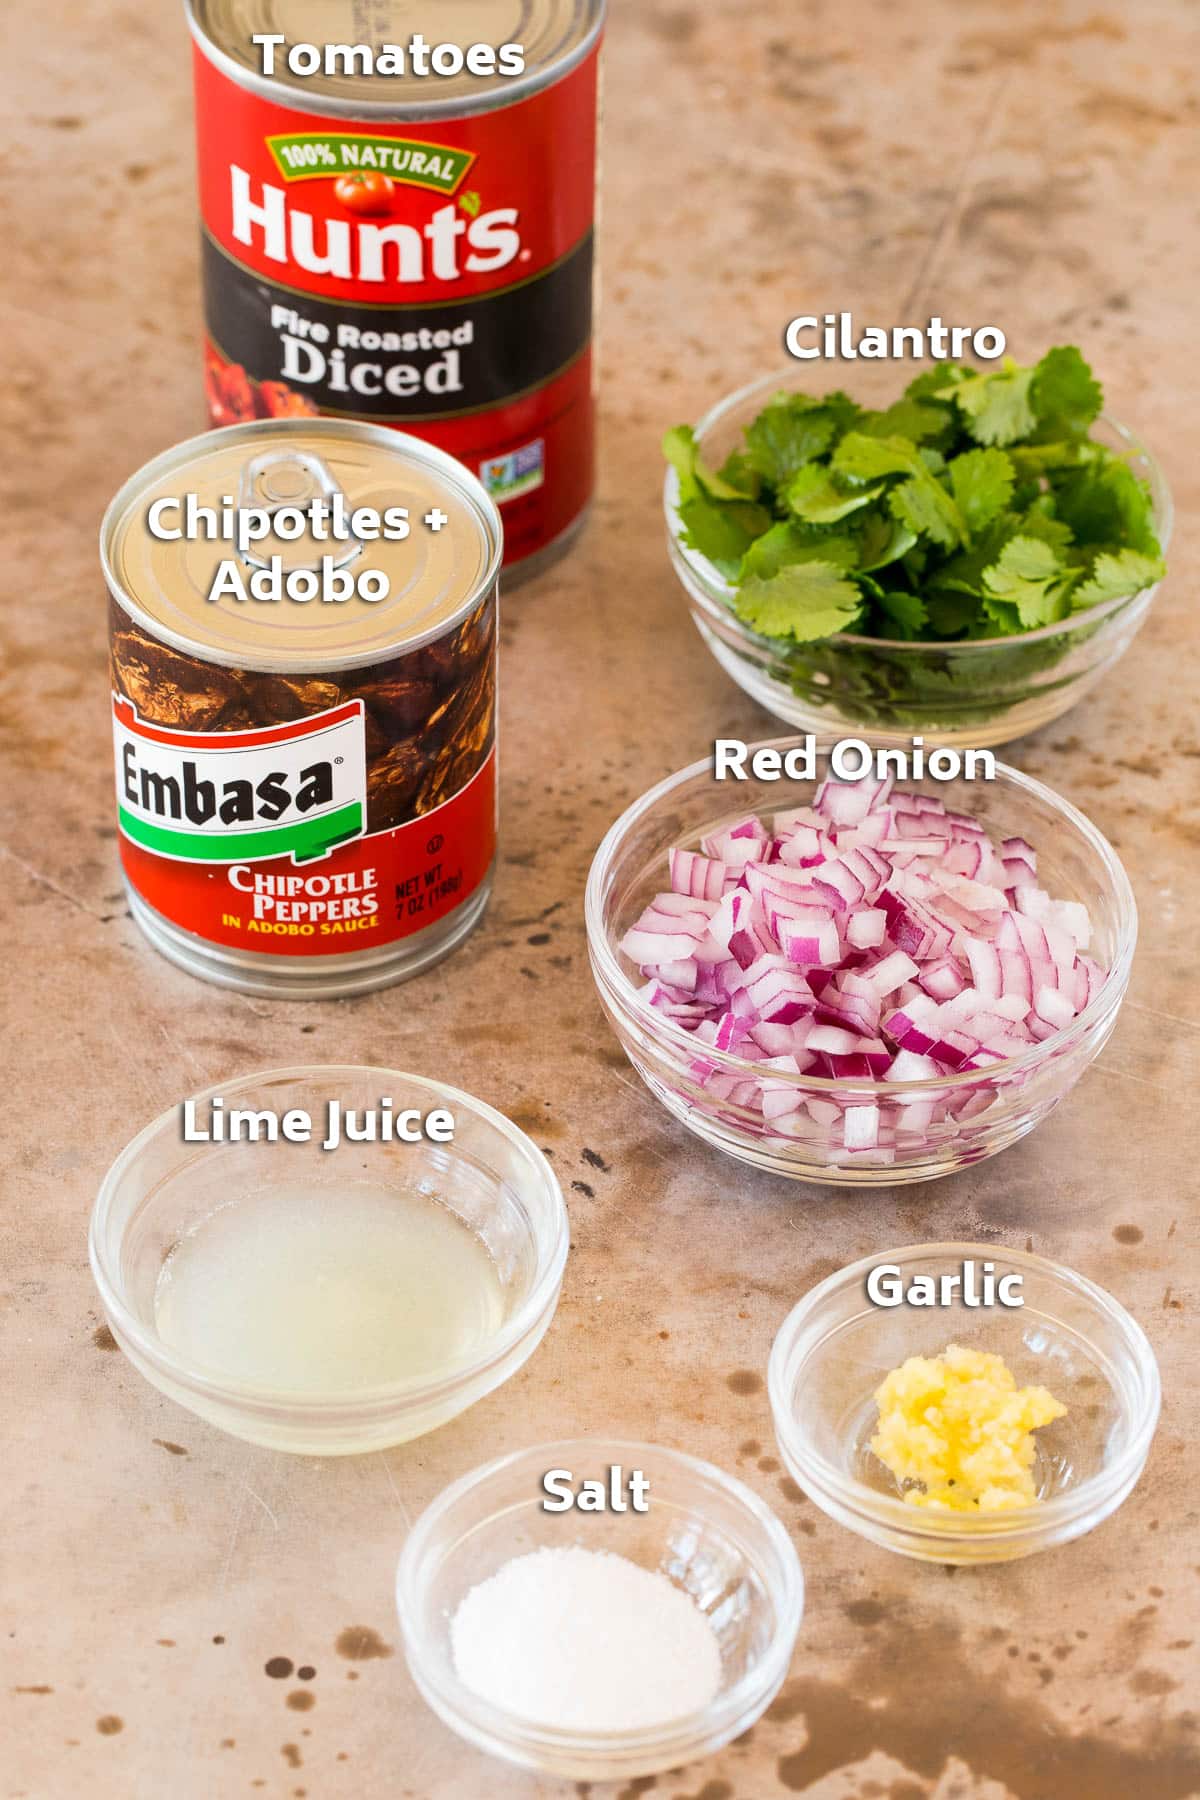 Ingredients including canned tomatoes, chipotle peppers, cilantro, red onion and seasonings.